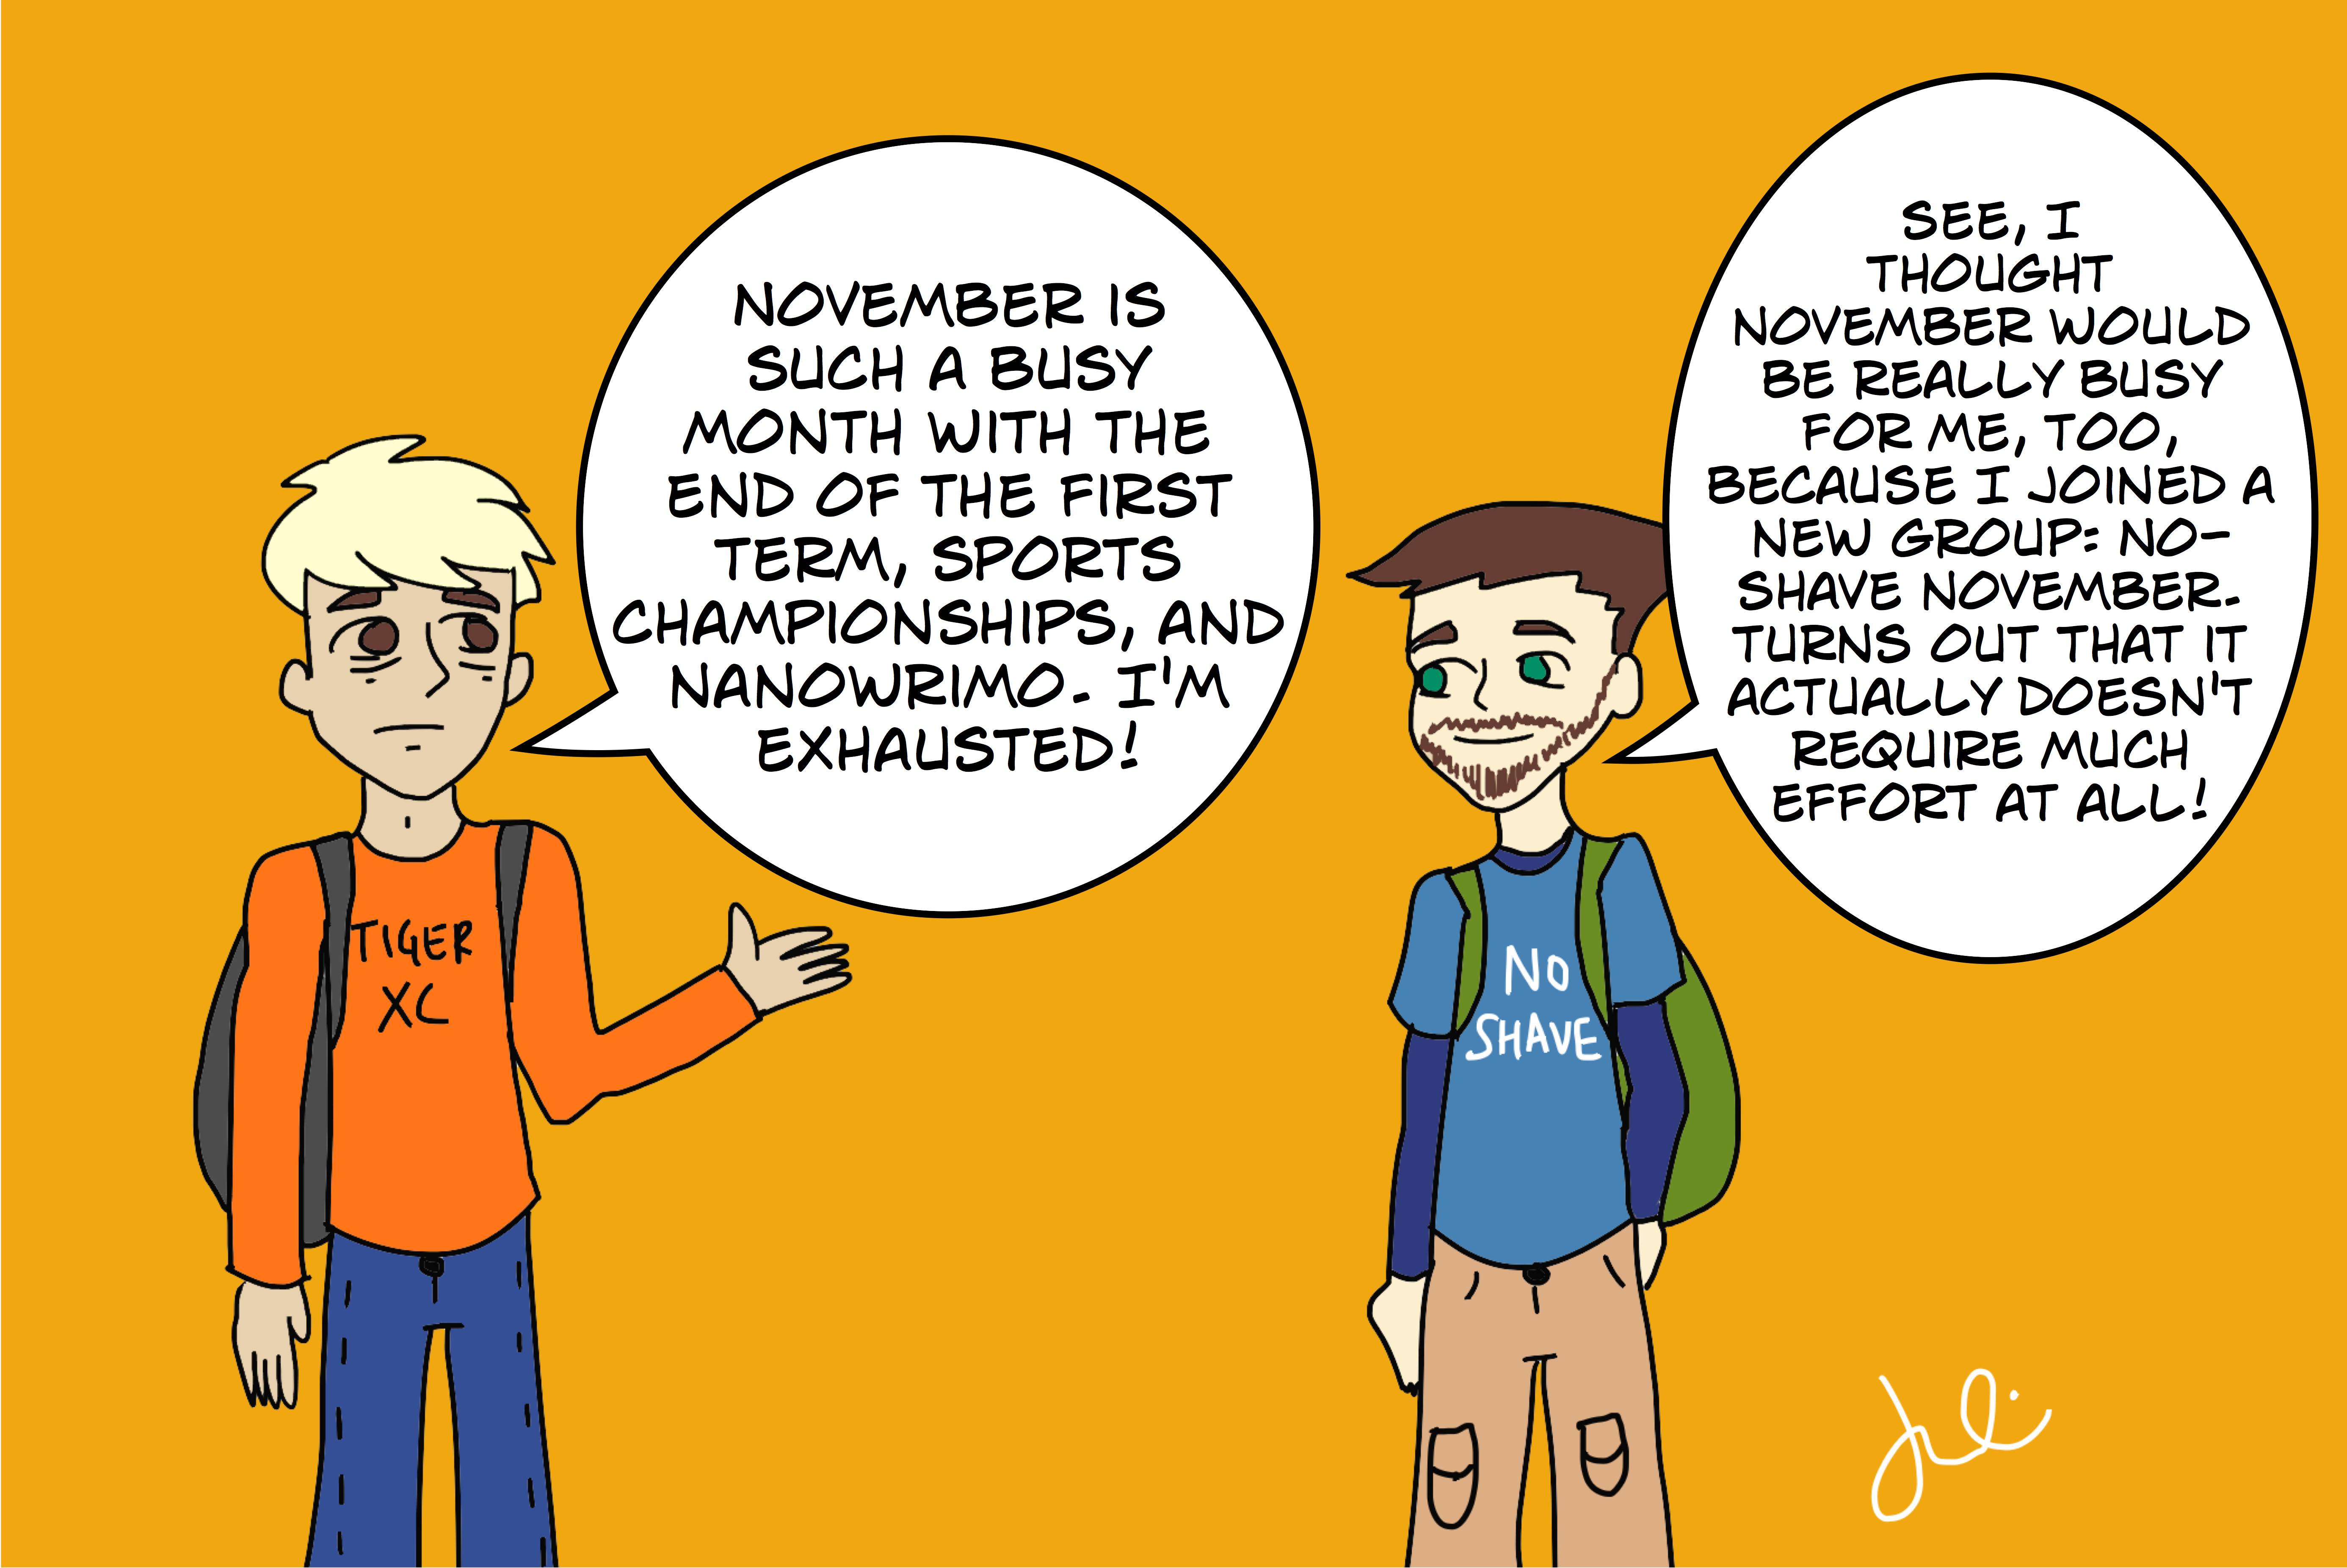 There is a lot going on at Newton North this month -- from the end of the term, to sports championships, to NaNoWriMo, to No-Shave November. Graphic by Julia Moss.